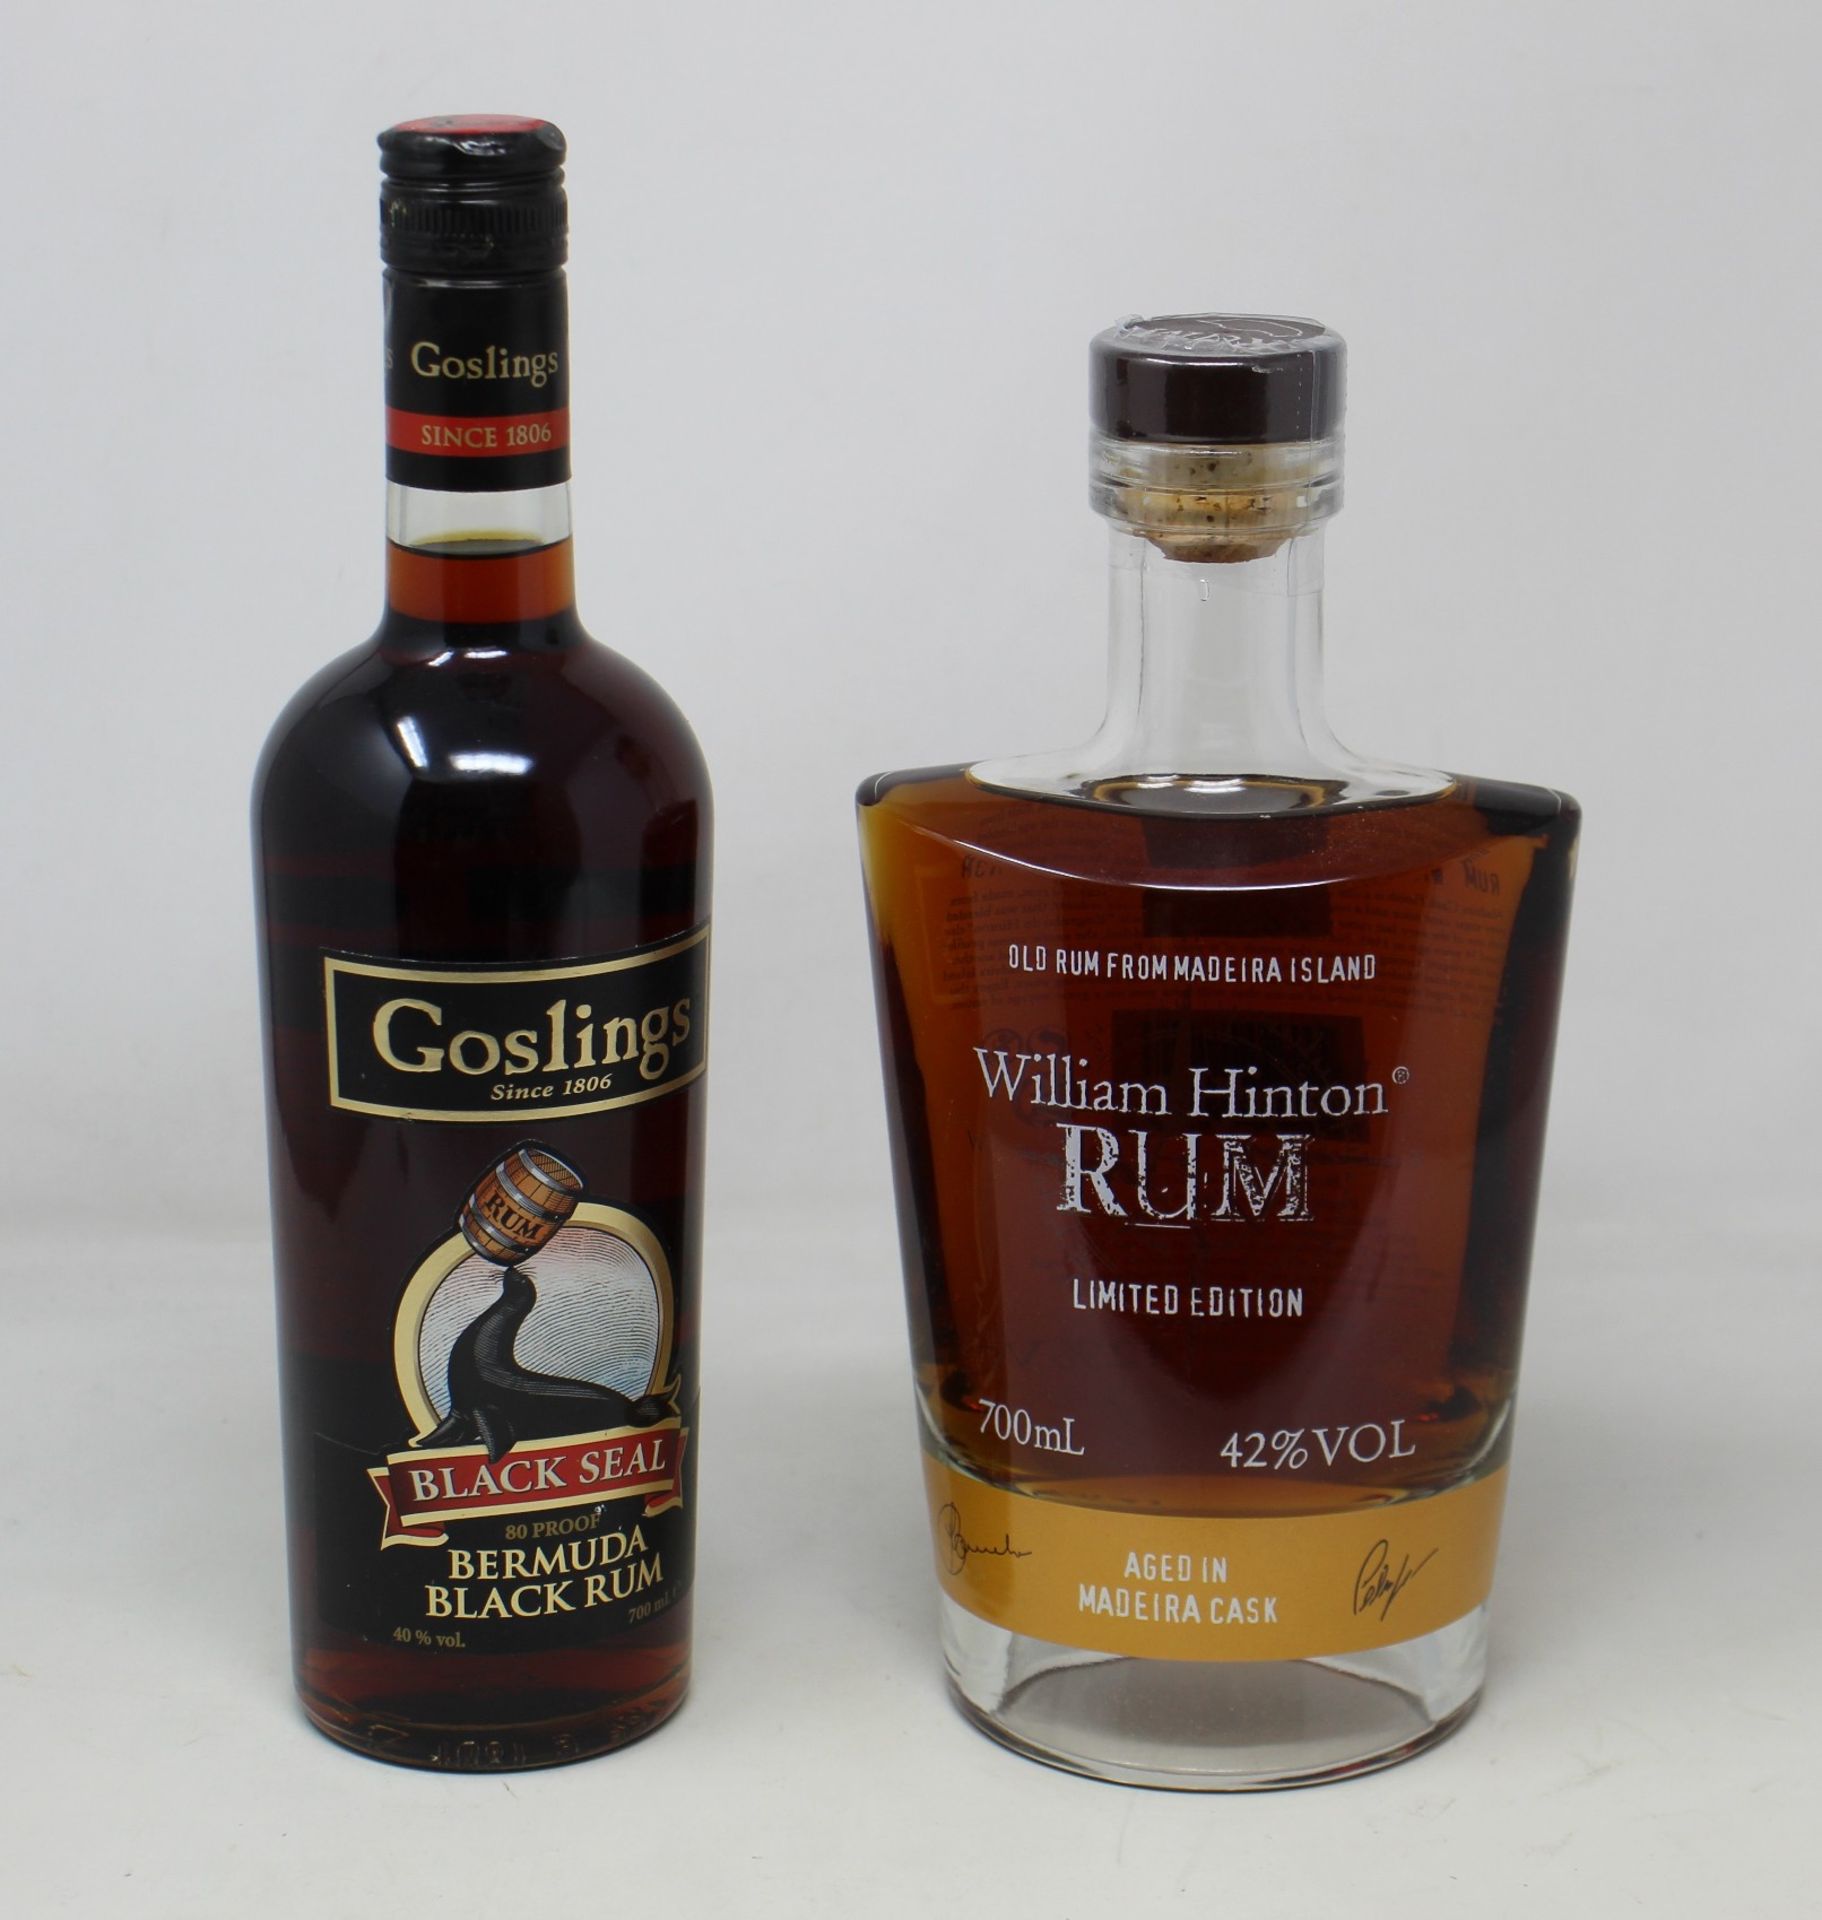 A William Hinton limited edition rum (700ml) and a Goslings Black Seal 80 proof Bermuda black rum (